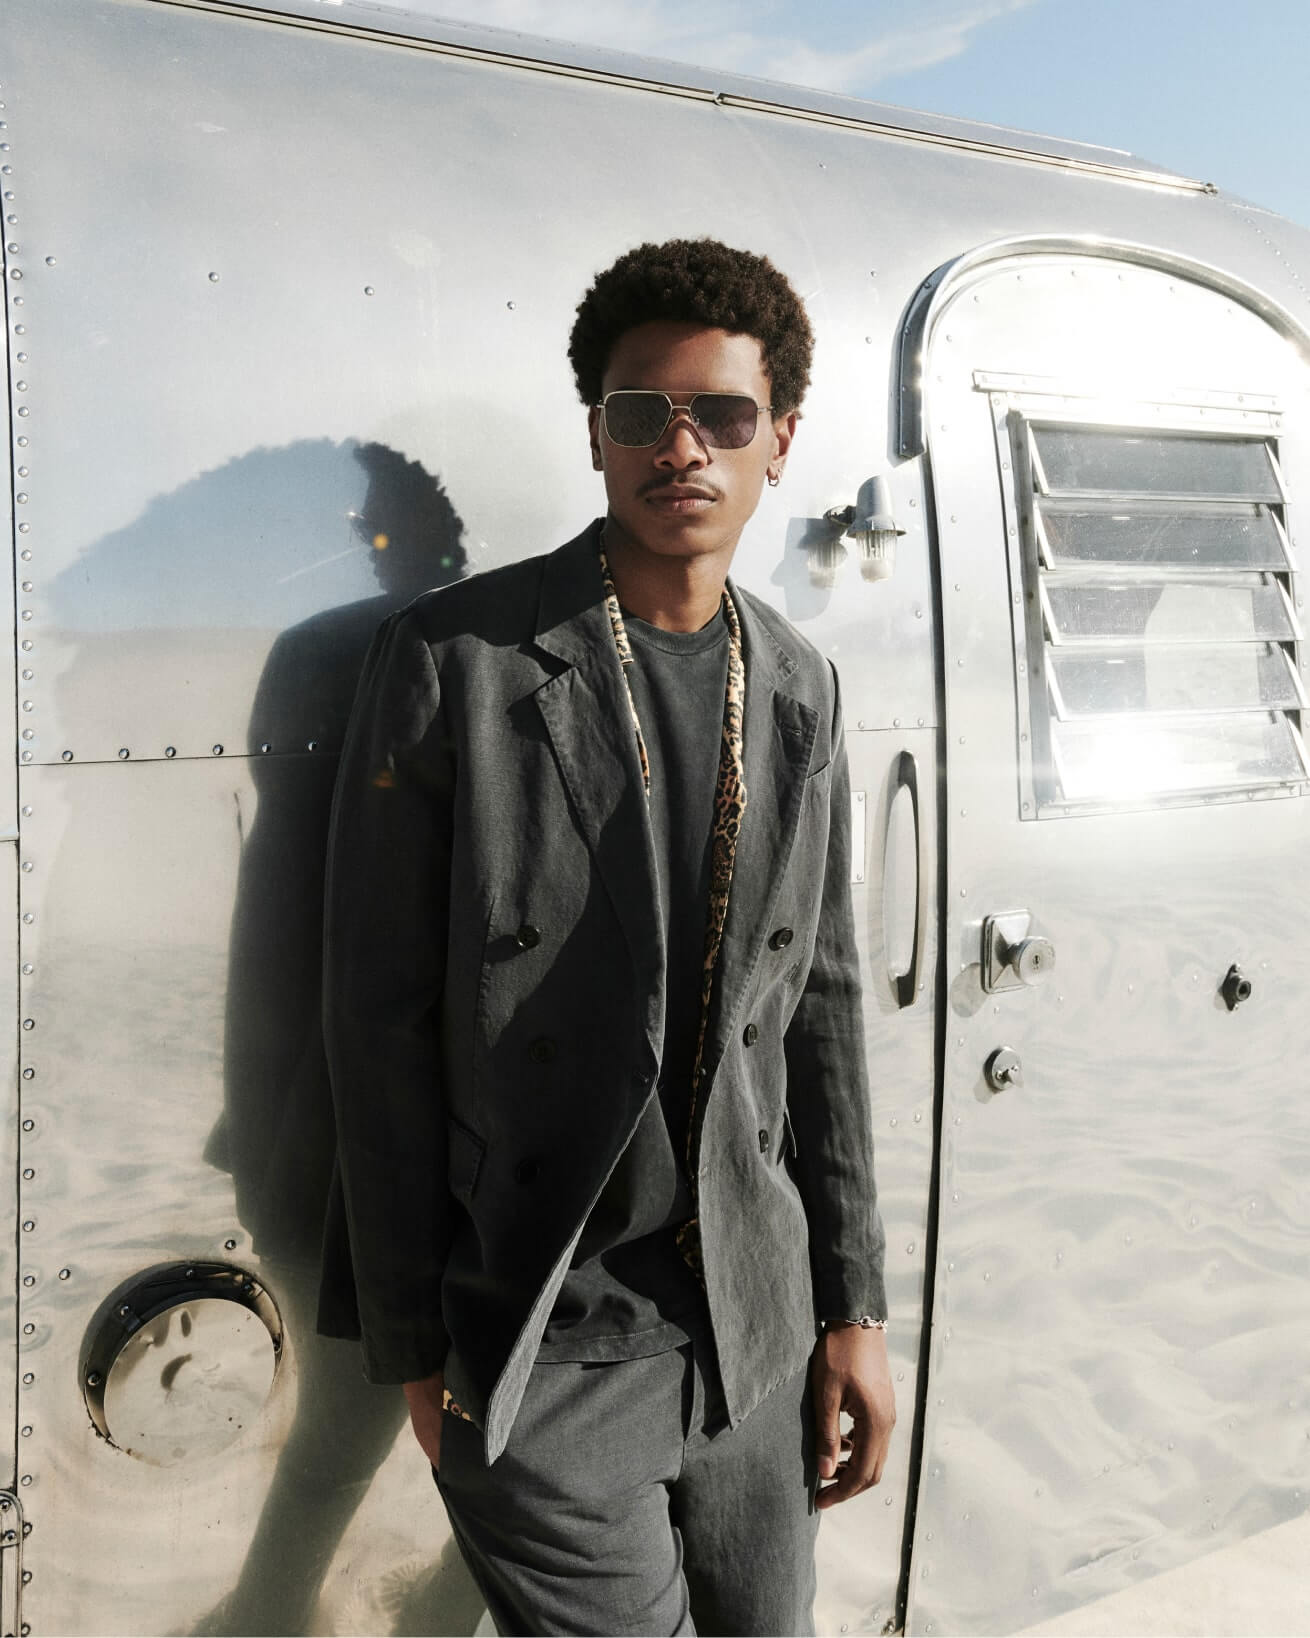 A man wearing a grey tailored suit and sunglasses standing against an old fashioned aeroplane.